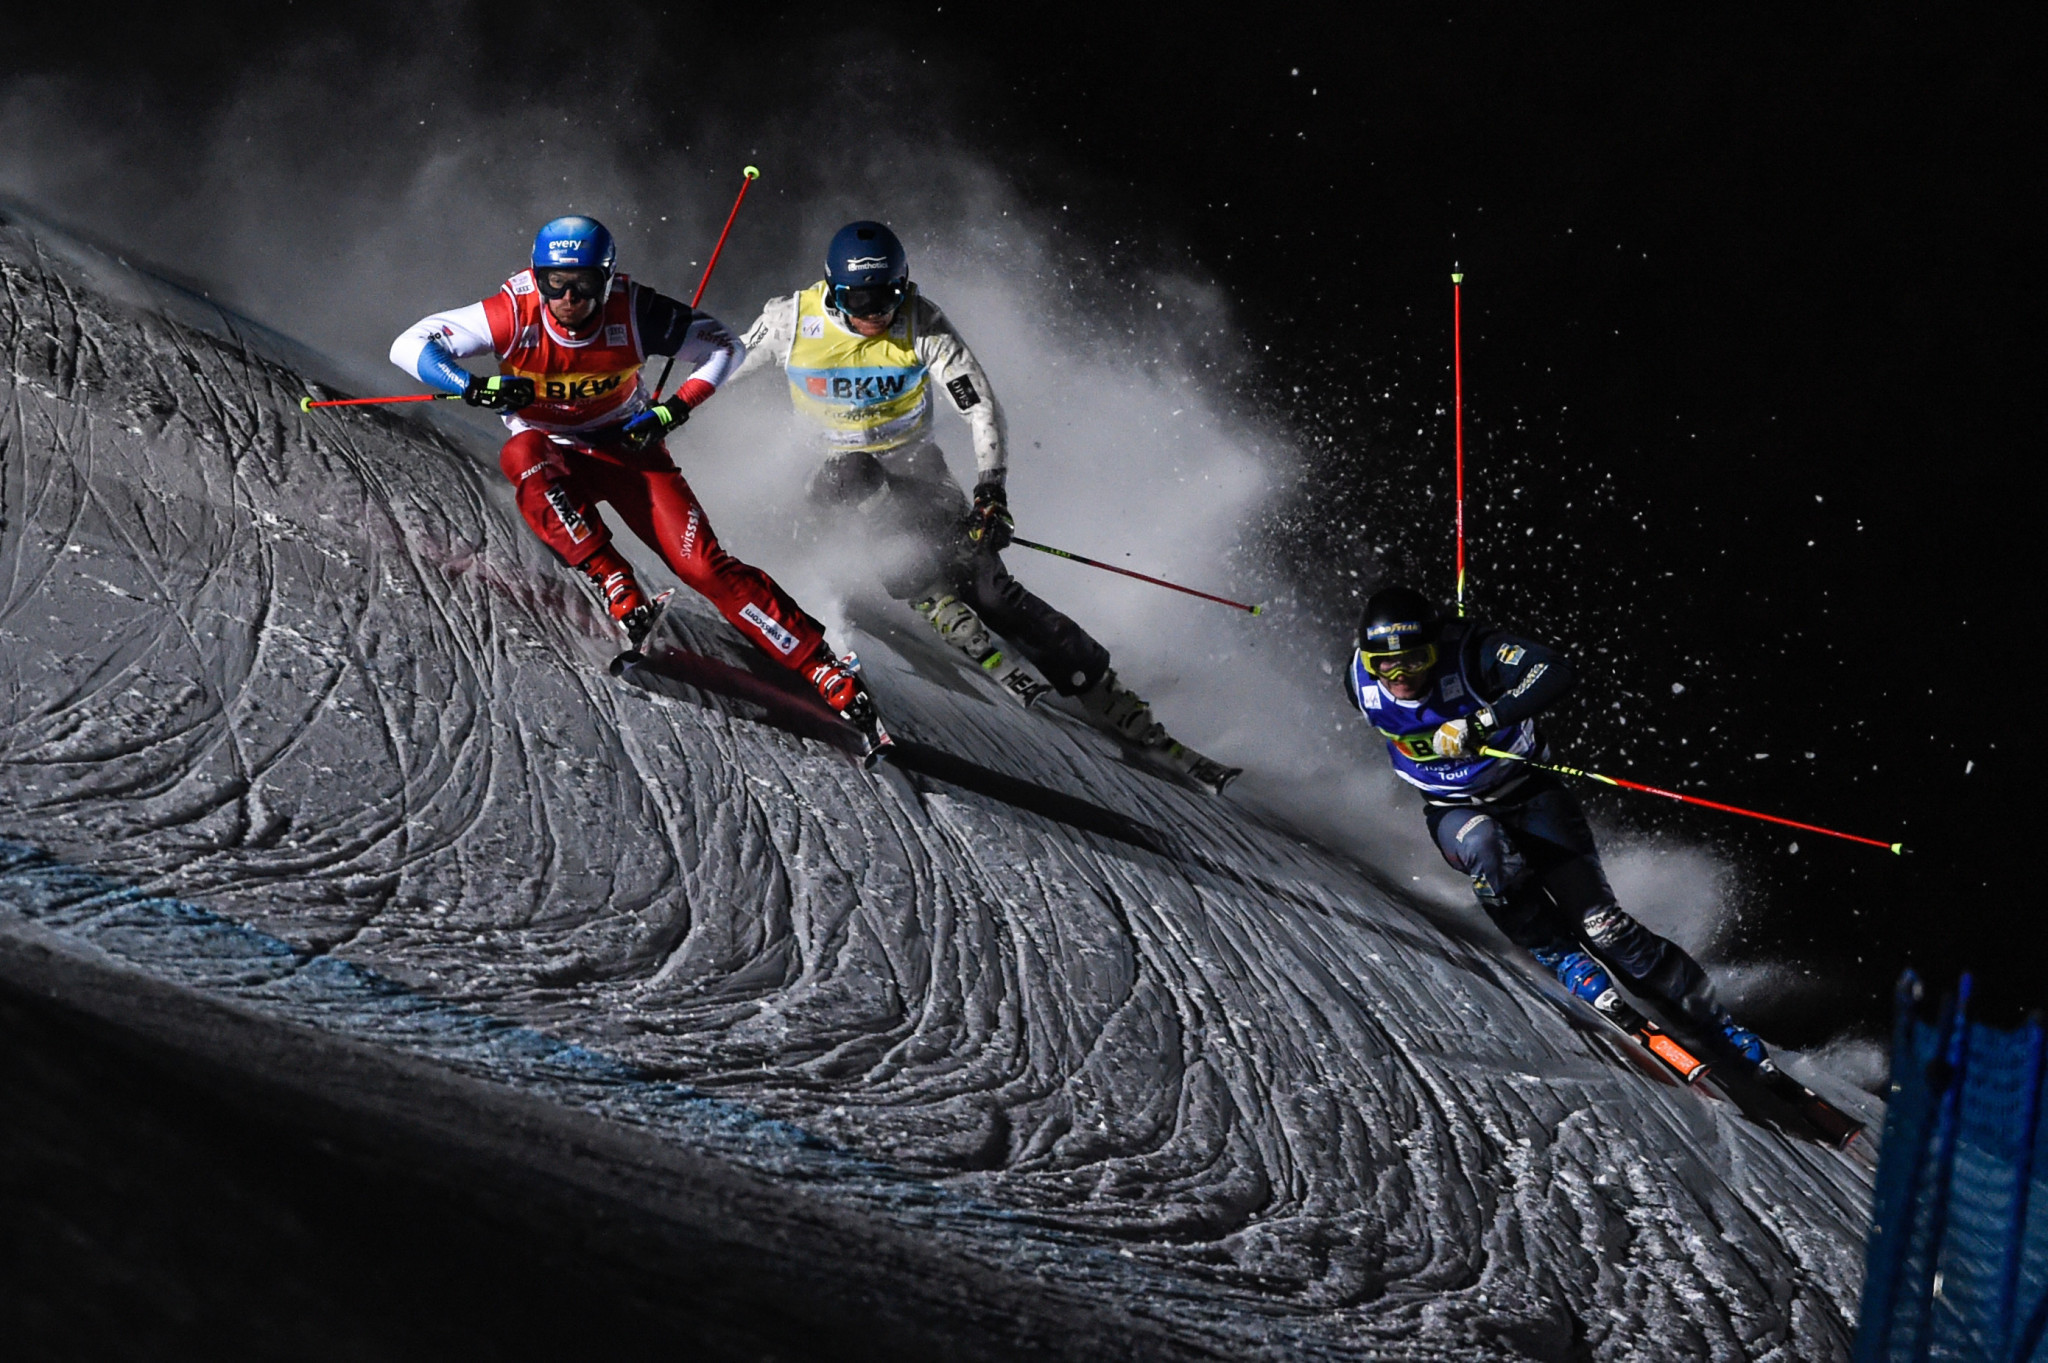 The FIS Ski Cross World Cup event in Arosa is set to take place under floodlights ©Getty Images